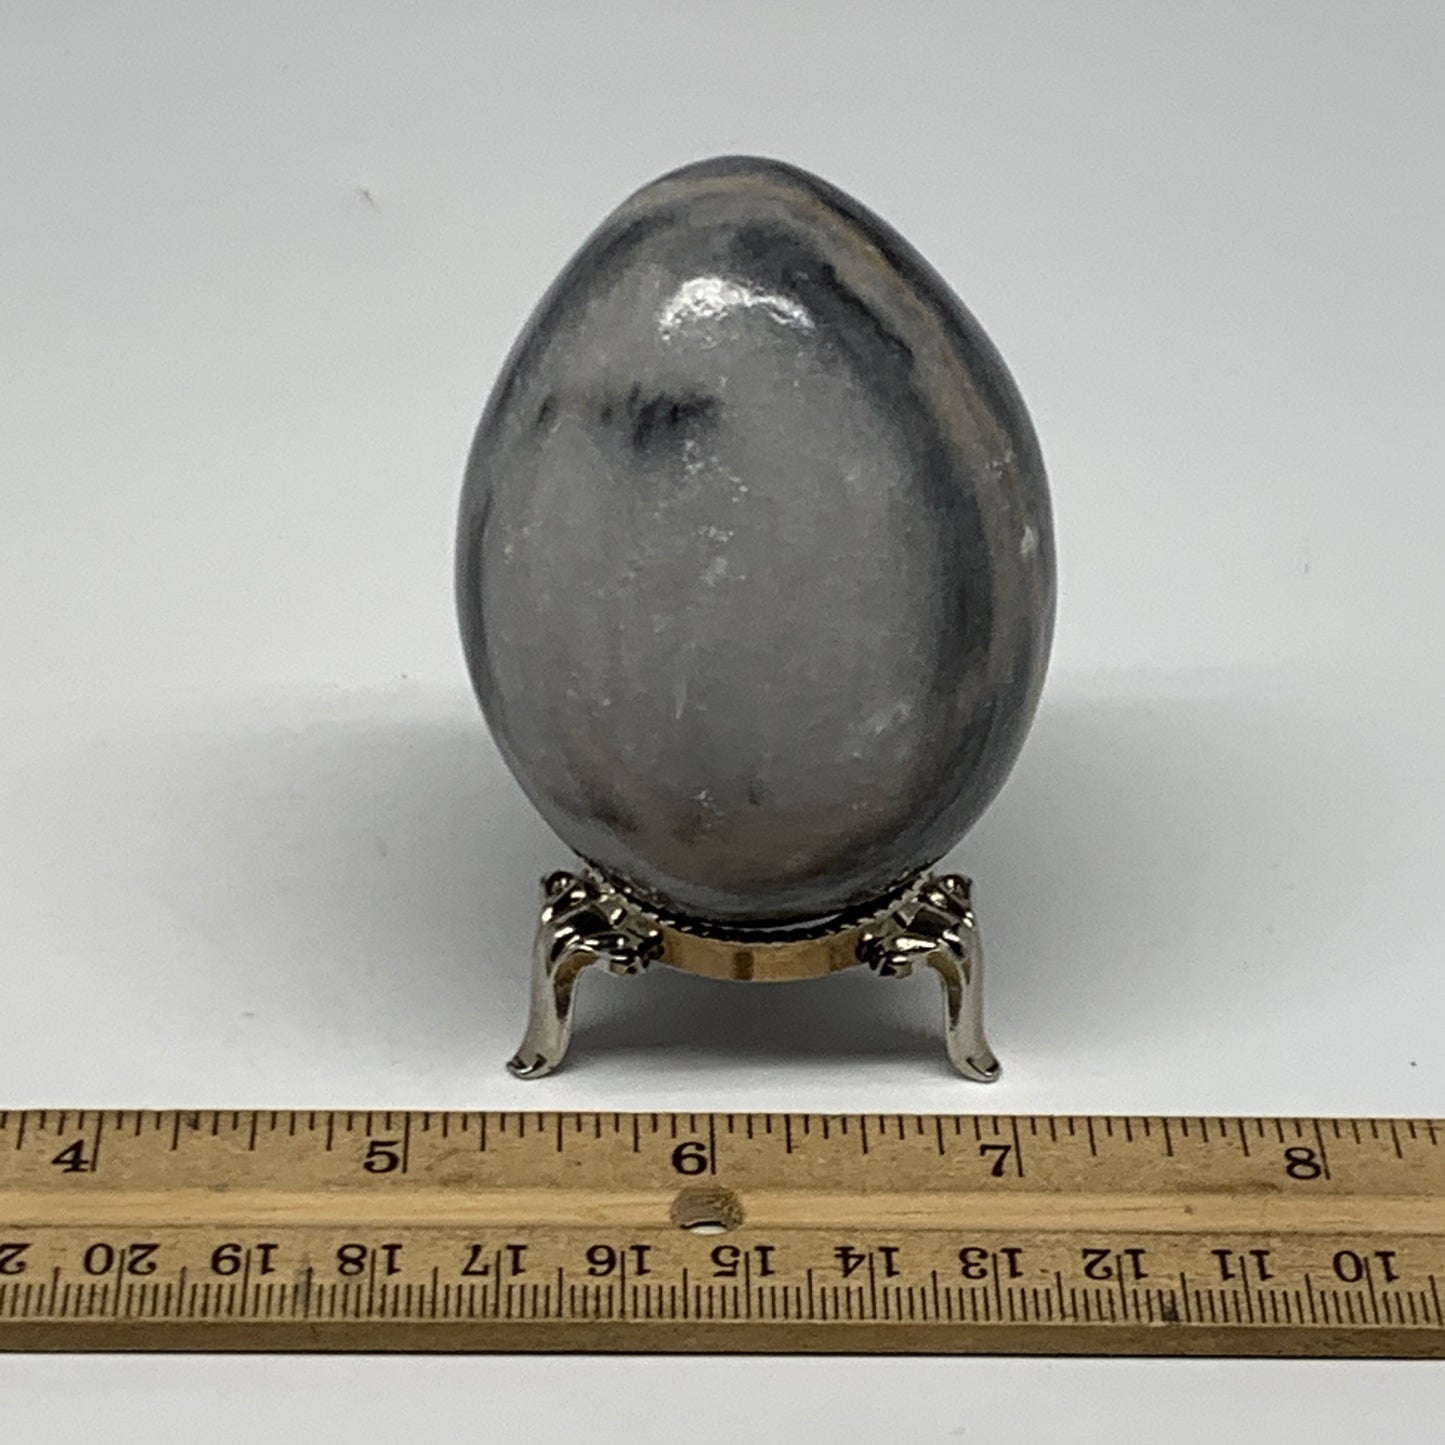 226.6g, 2.6"x2" Natural Gray Onyx Egg Gemstone Mineral, from Mexico, B21578